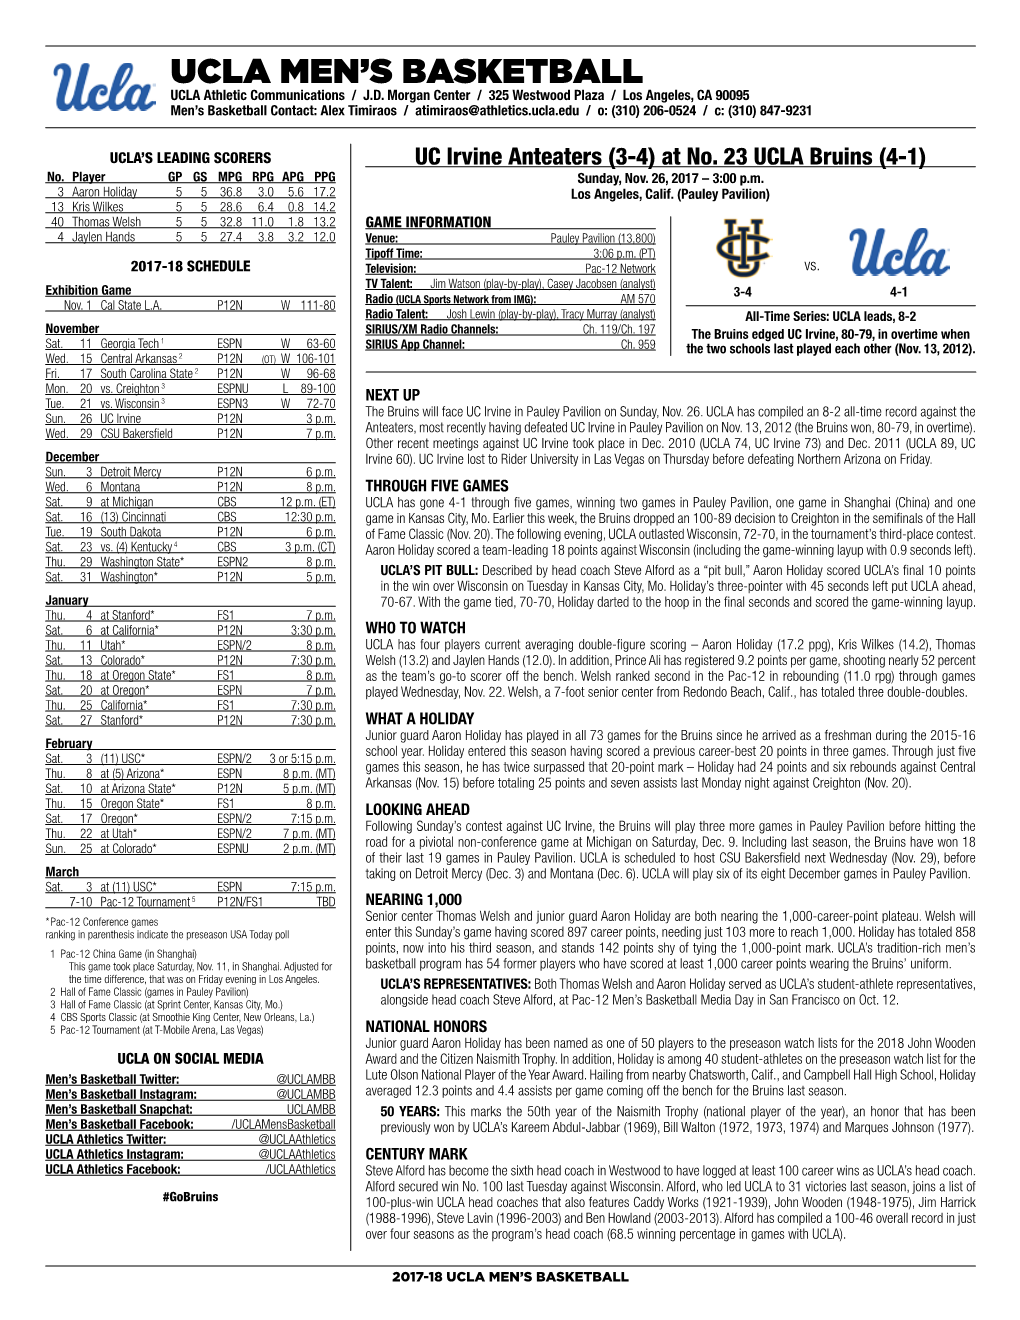 UCLA Men's Basketball KEY NOTES on IKENNA OKWARABIZIE Hands, Jaylen • Has Played in 20 Career Contests Over the Course Ofucla Three Seasons Individual